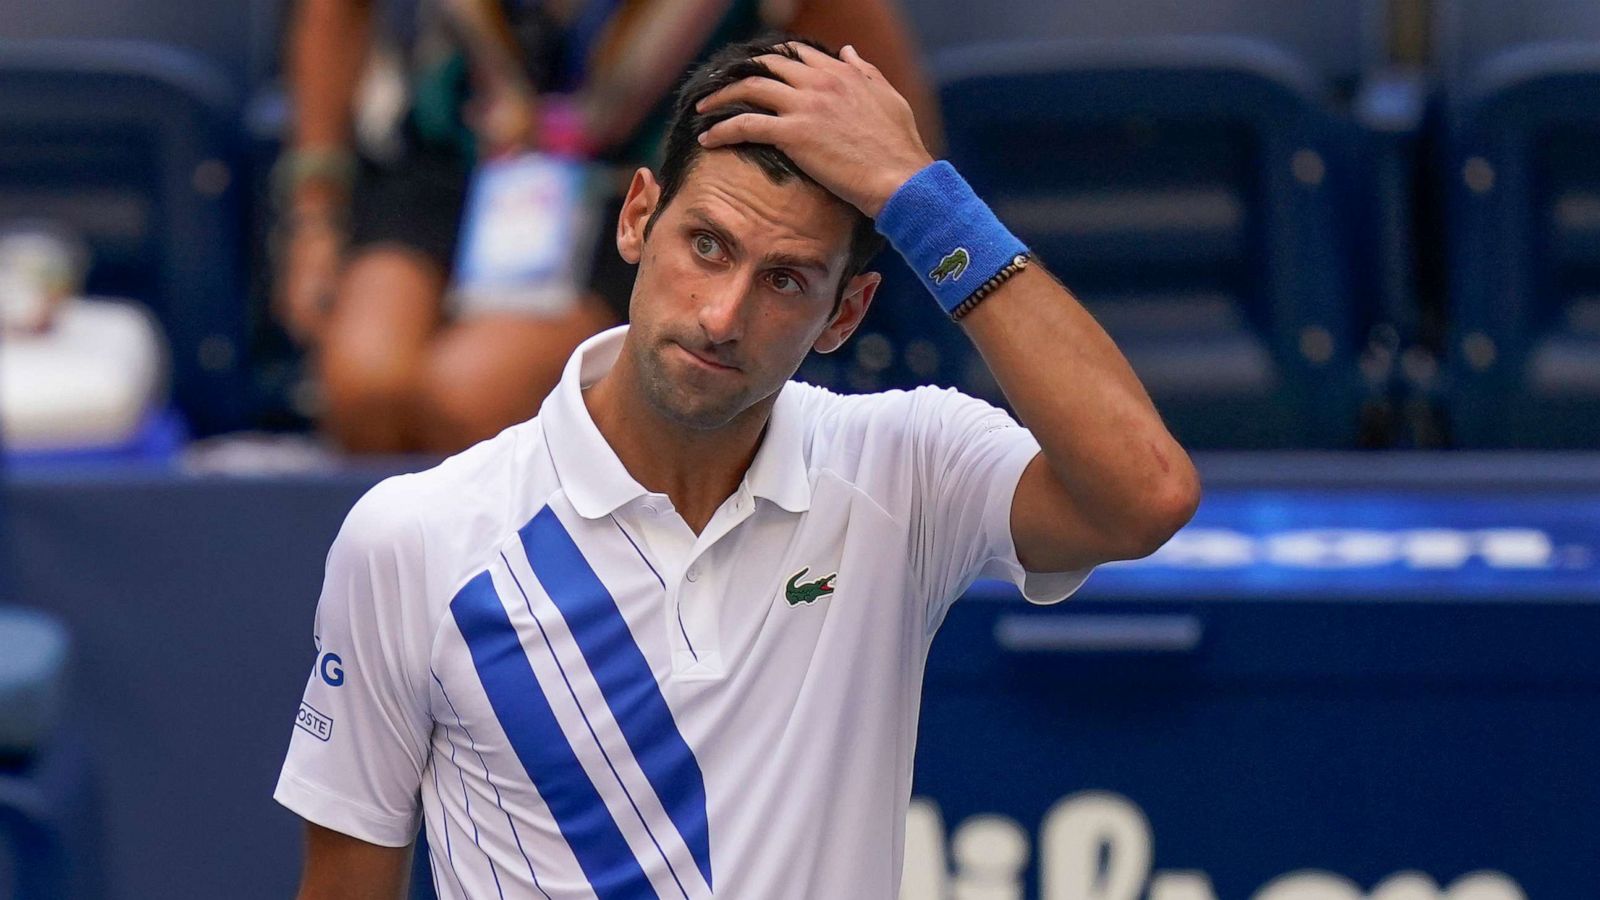 Novak Djokovic apologizes after defaulting US Open match for hitting line umpire with ball